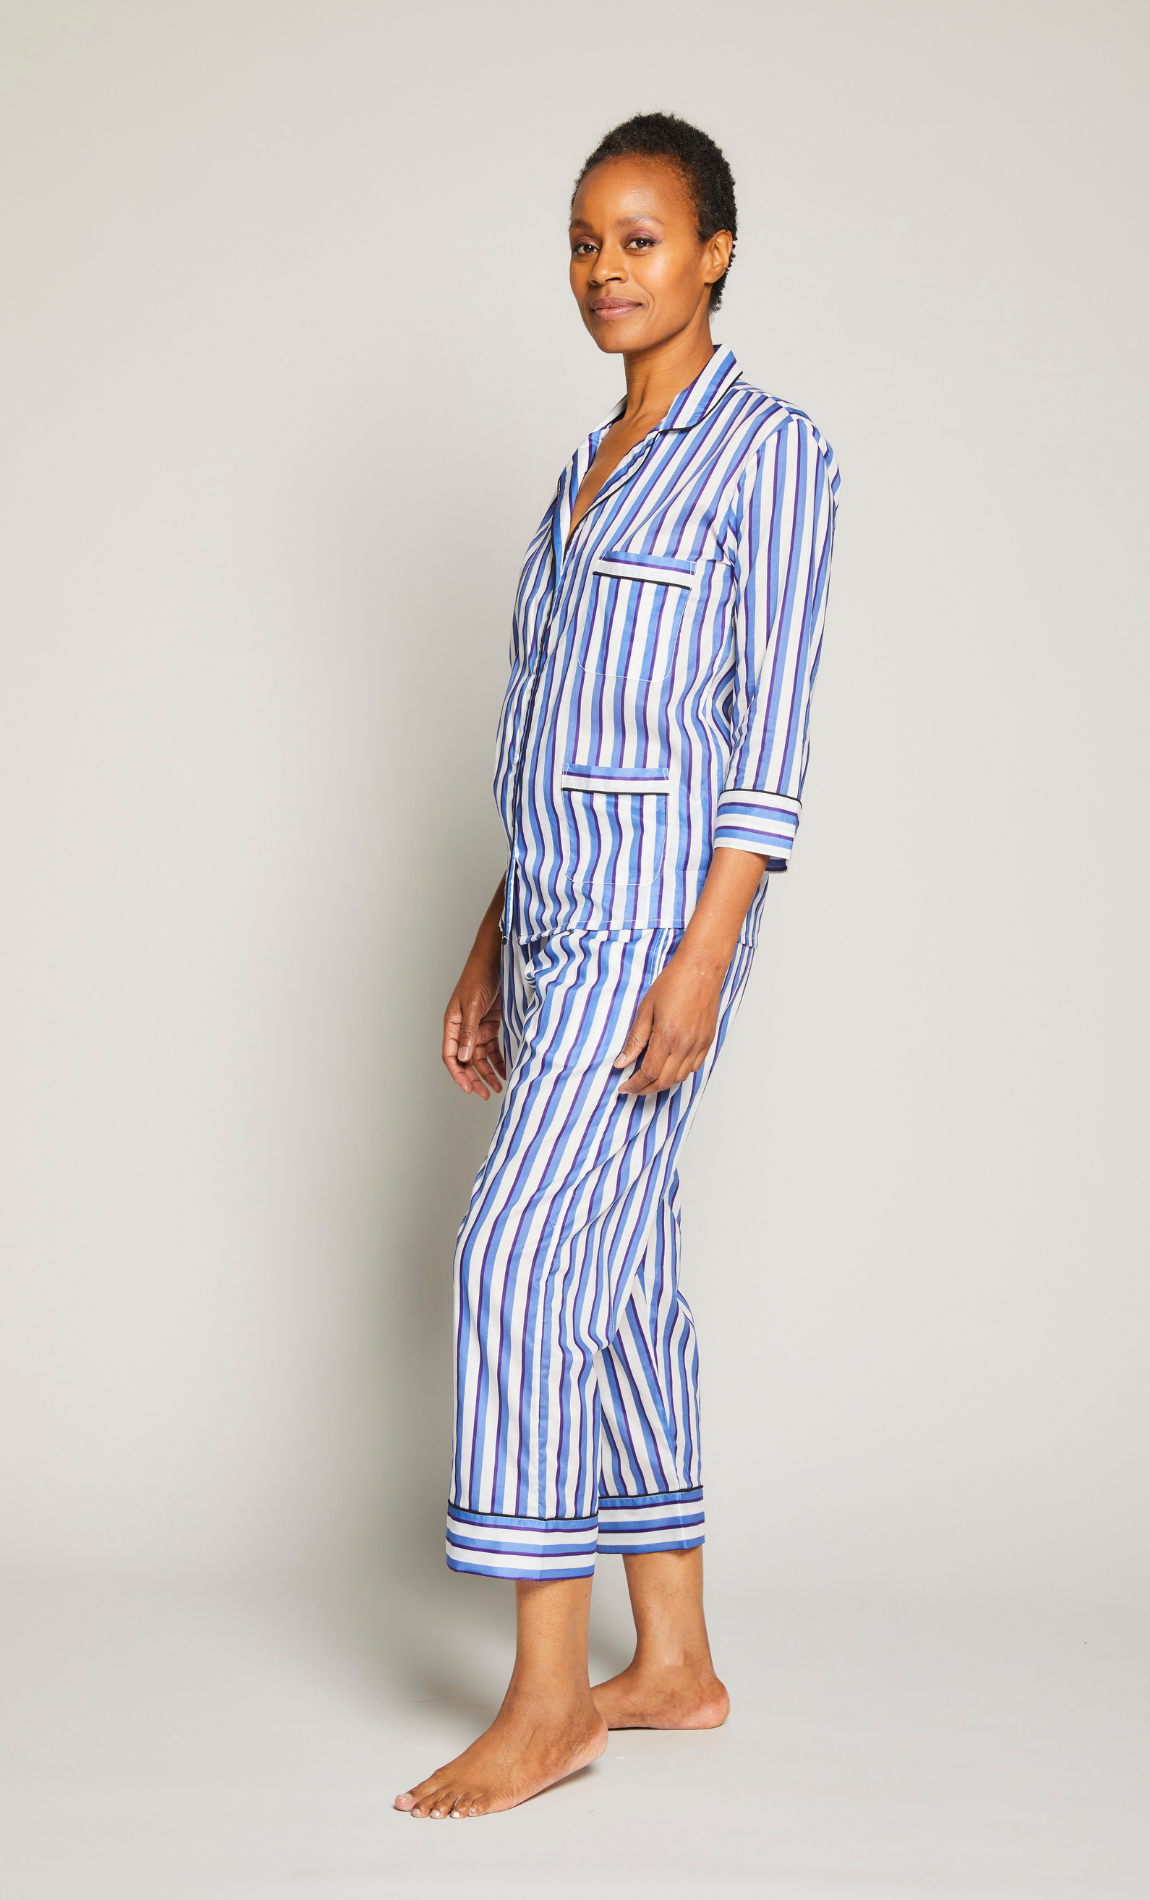 3/4 Sleeve Cropped Pant PJ Set With Piping